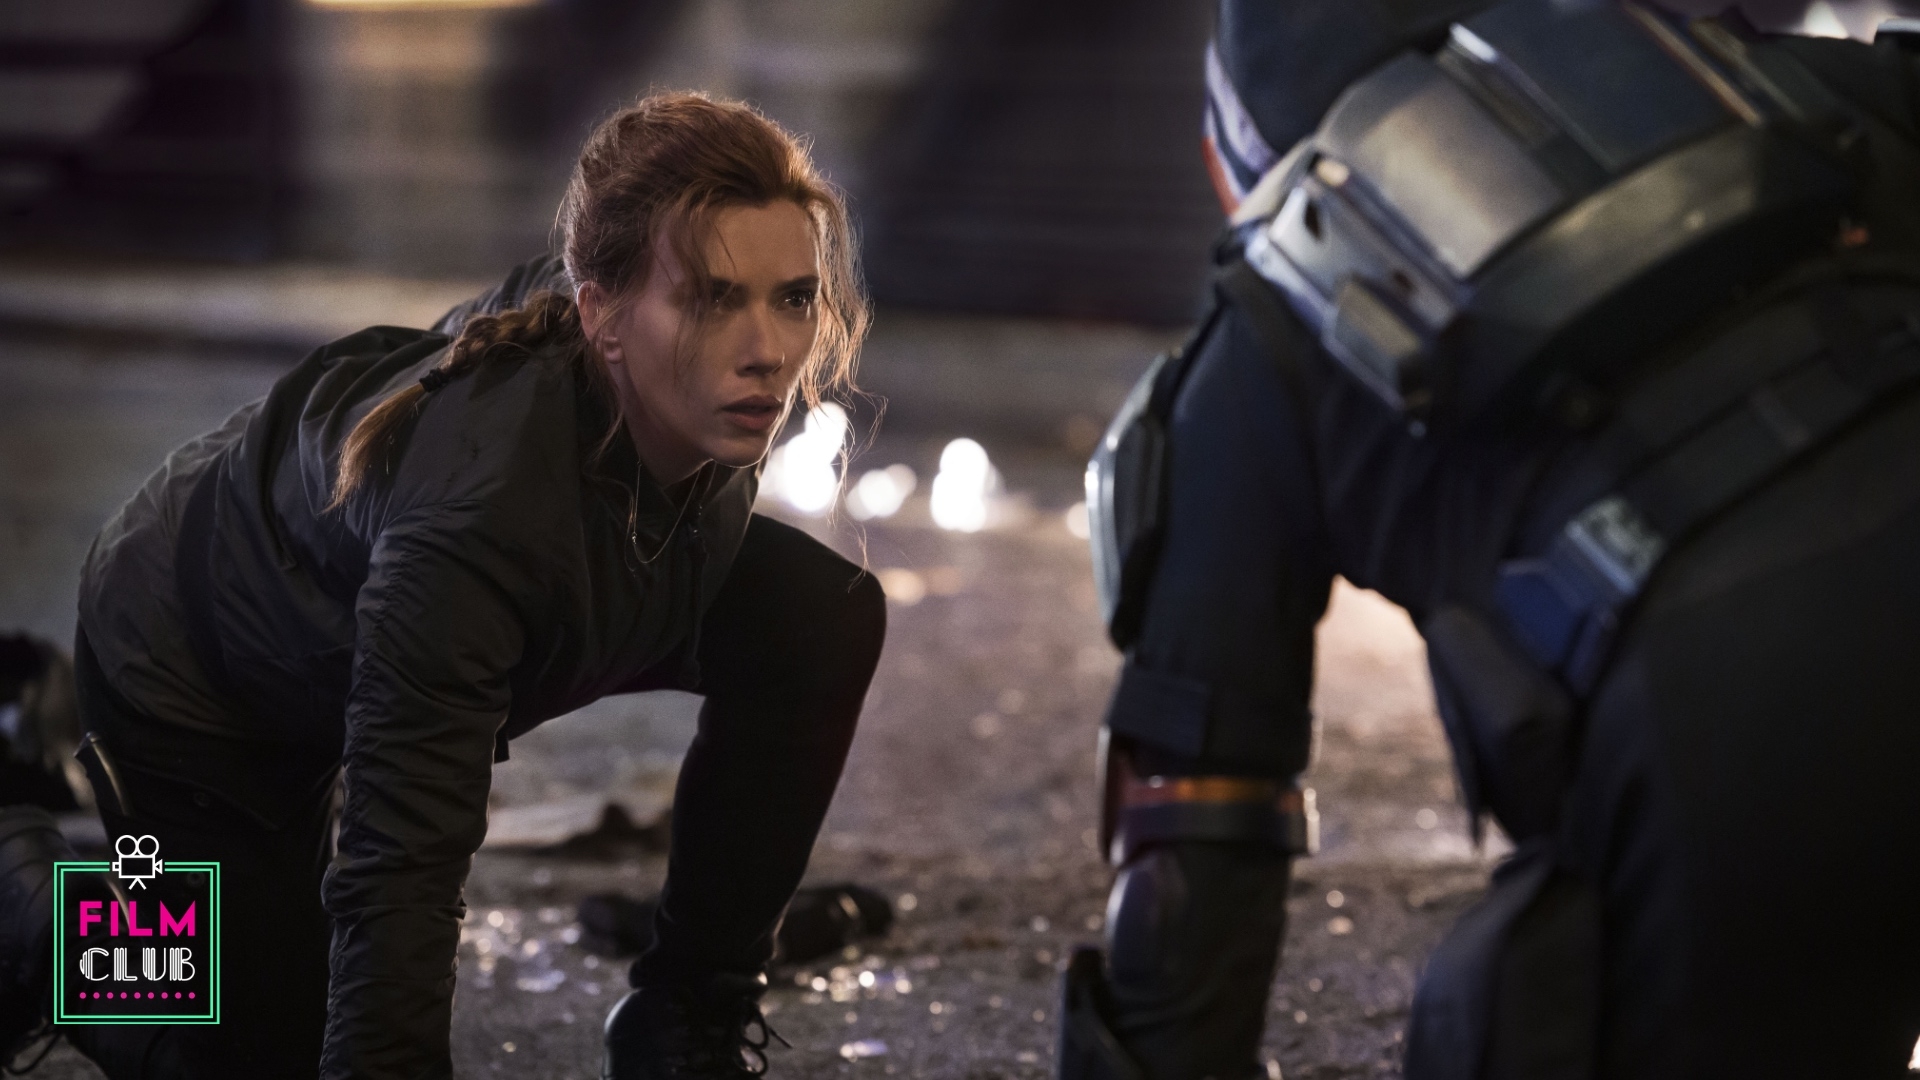 How Black Widow adheres to and breaks from the Marvel formula